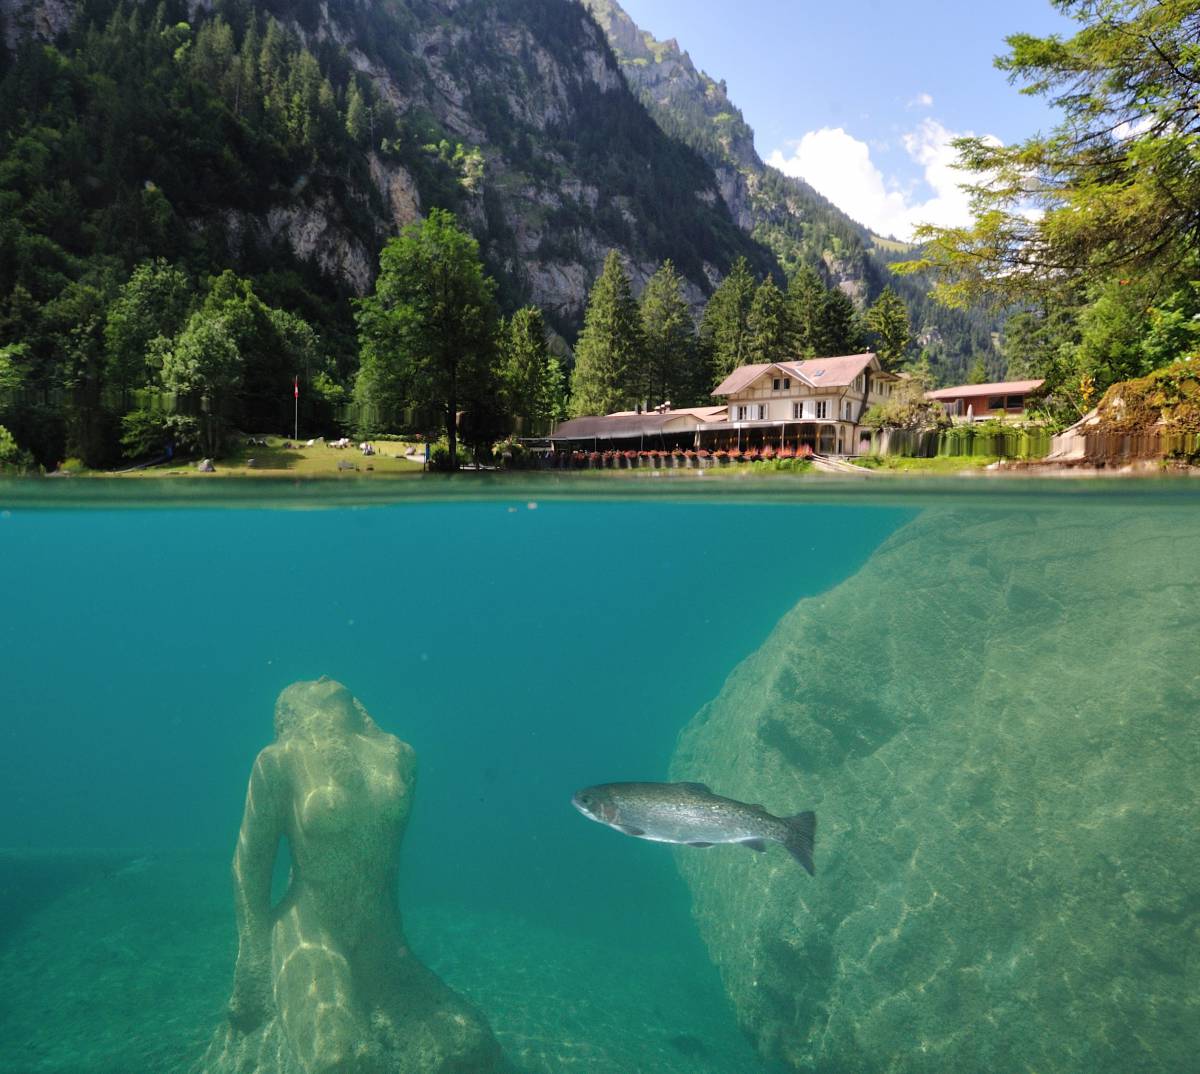  Blausee with trout, bistro in the background